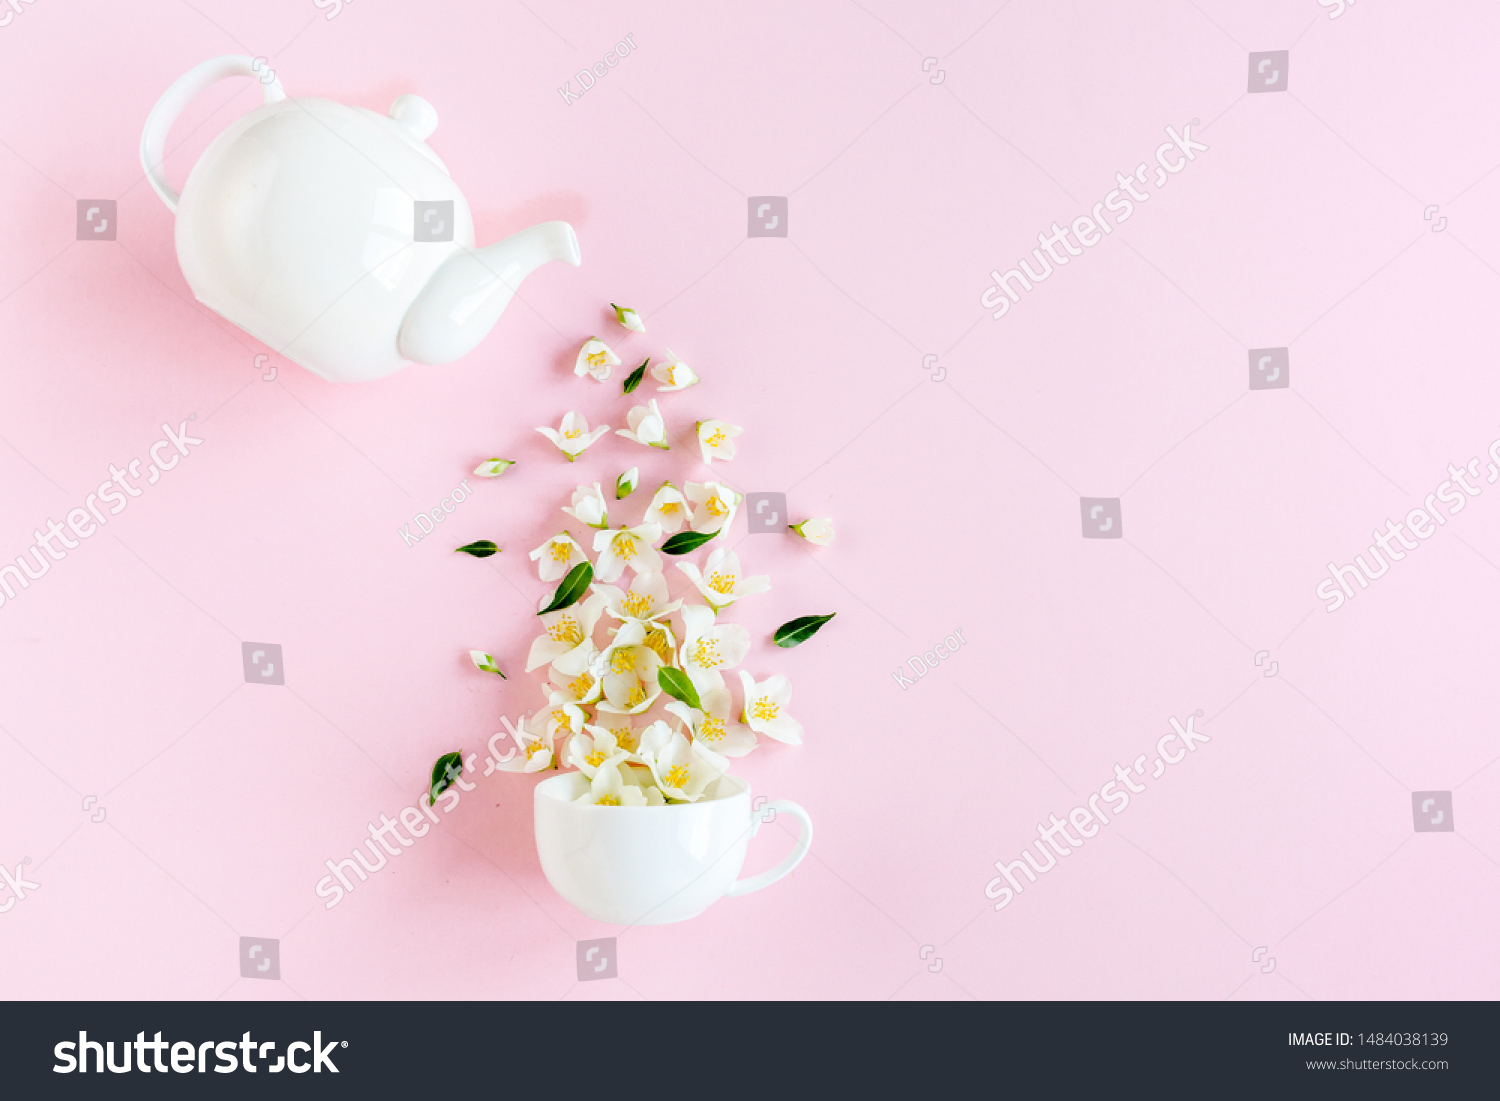 Creative layout of teapot and tea Cup with Jasmine flowers on a pink background. Jasmine tea. #1484038139